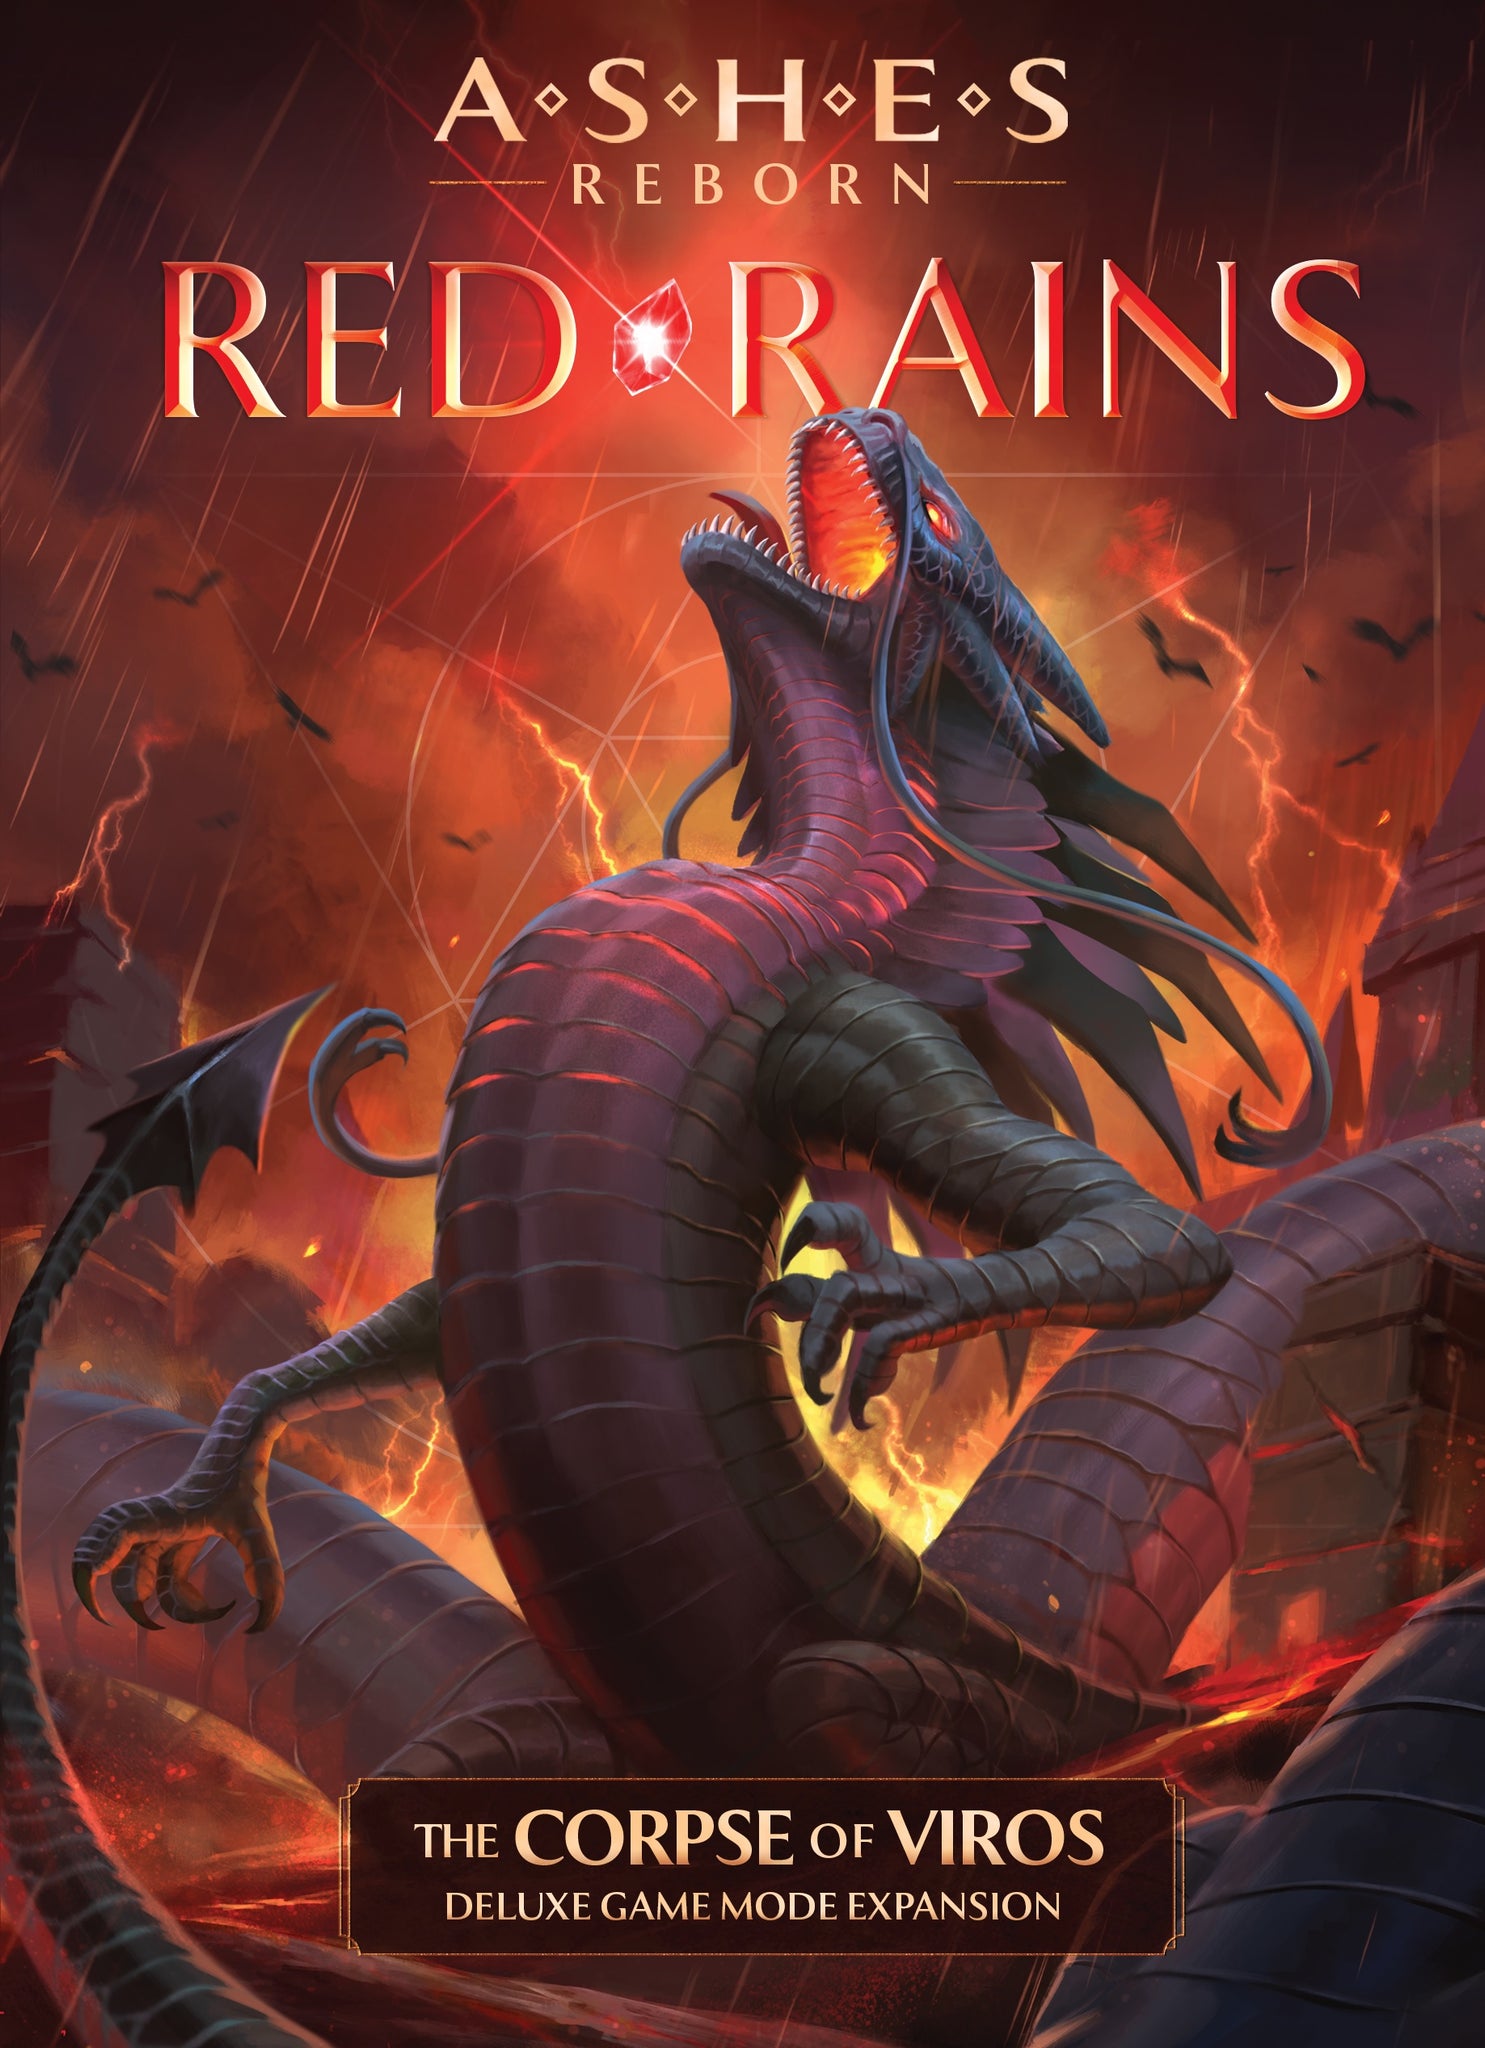 ASHES REBORN: RED RAINS CORPSE OF VIROS